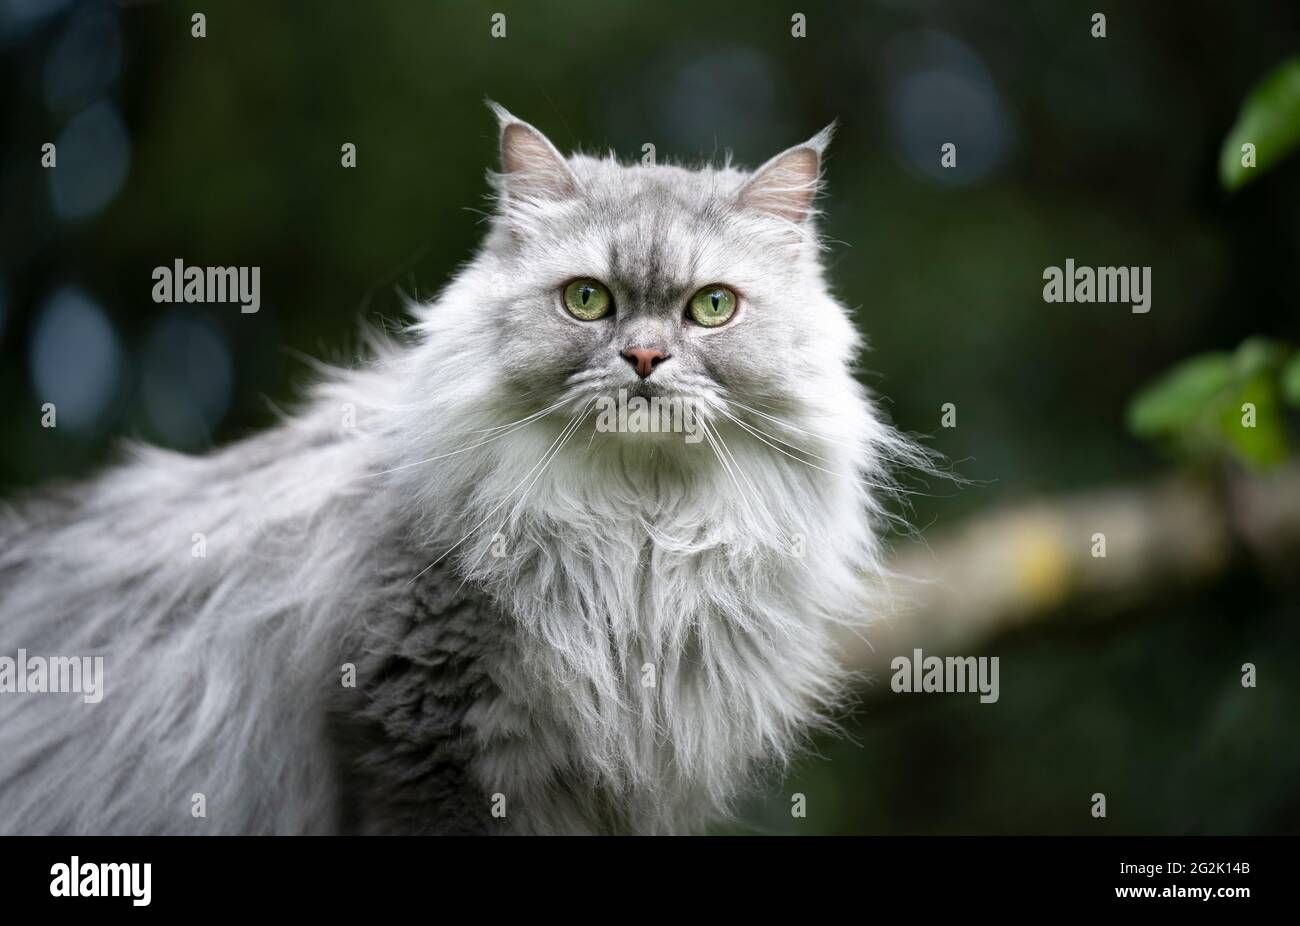 gray silver tabby british longhair cat outdoors in nature portrait looking at camera Stock Photo